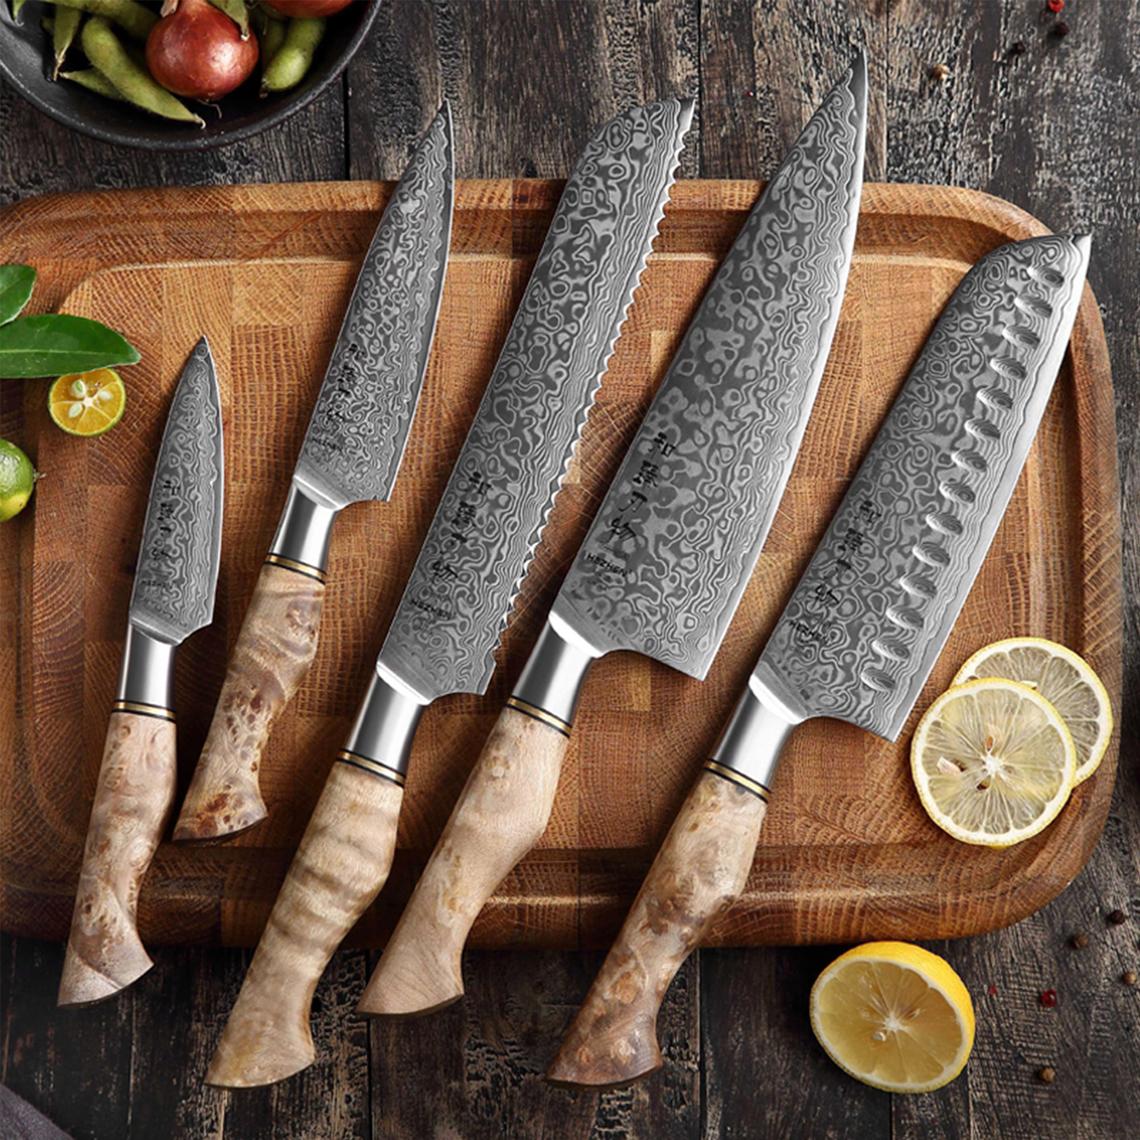 Knife Block Sets Top Gifts